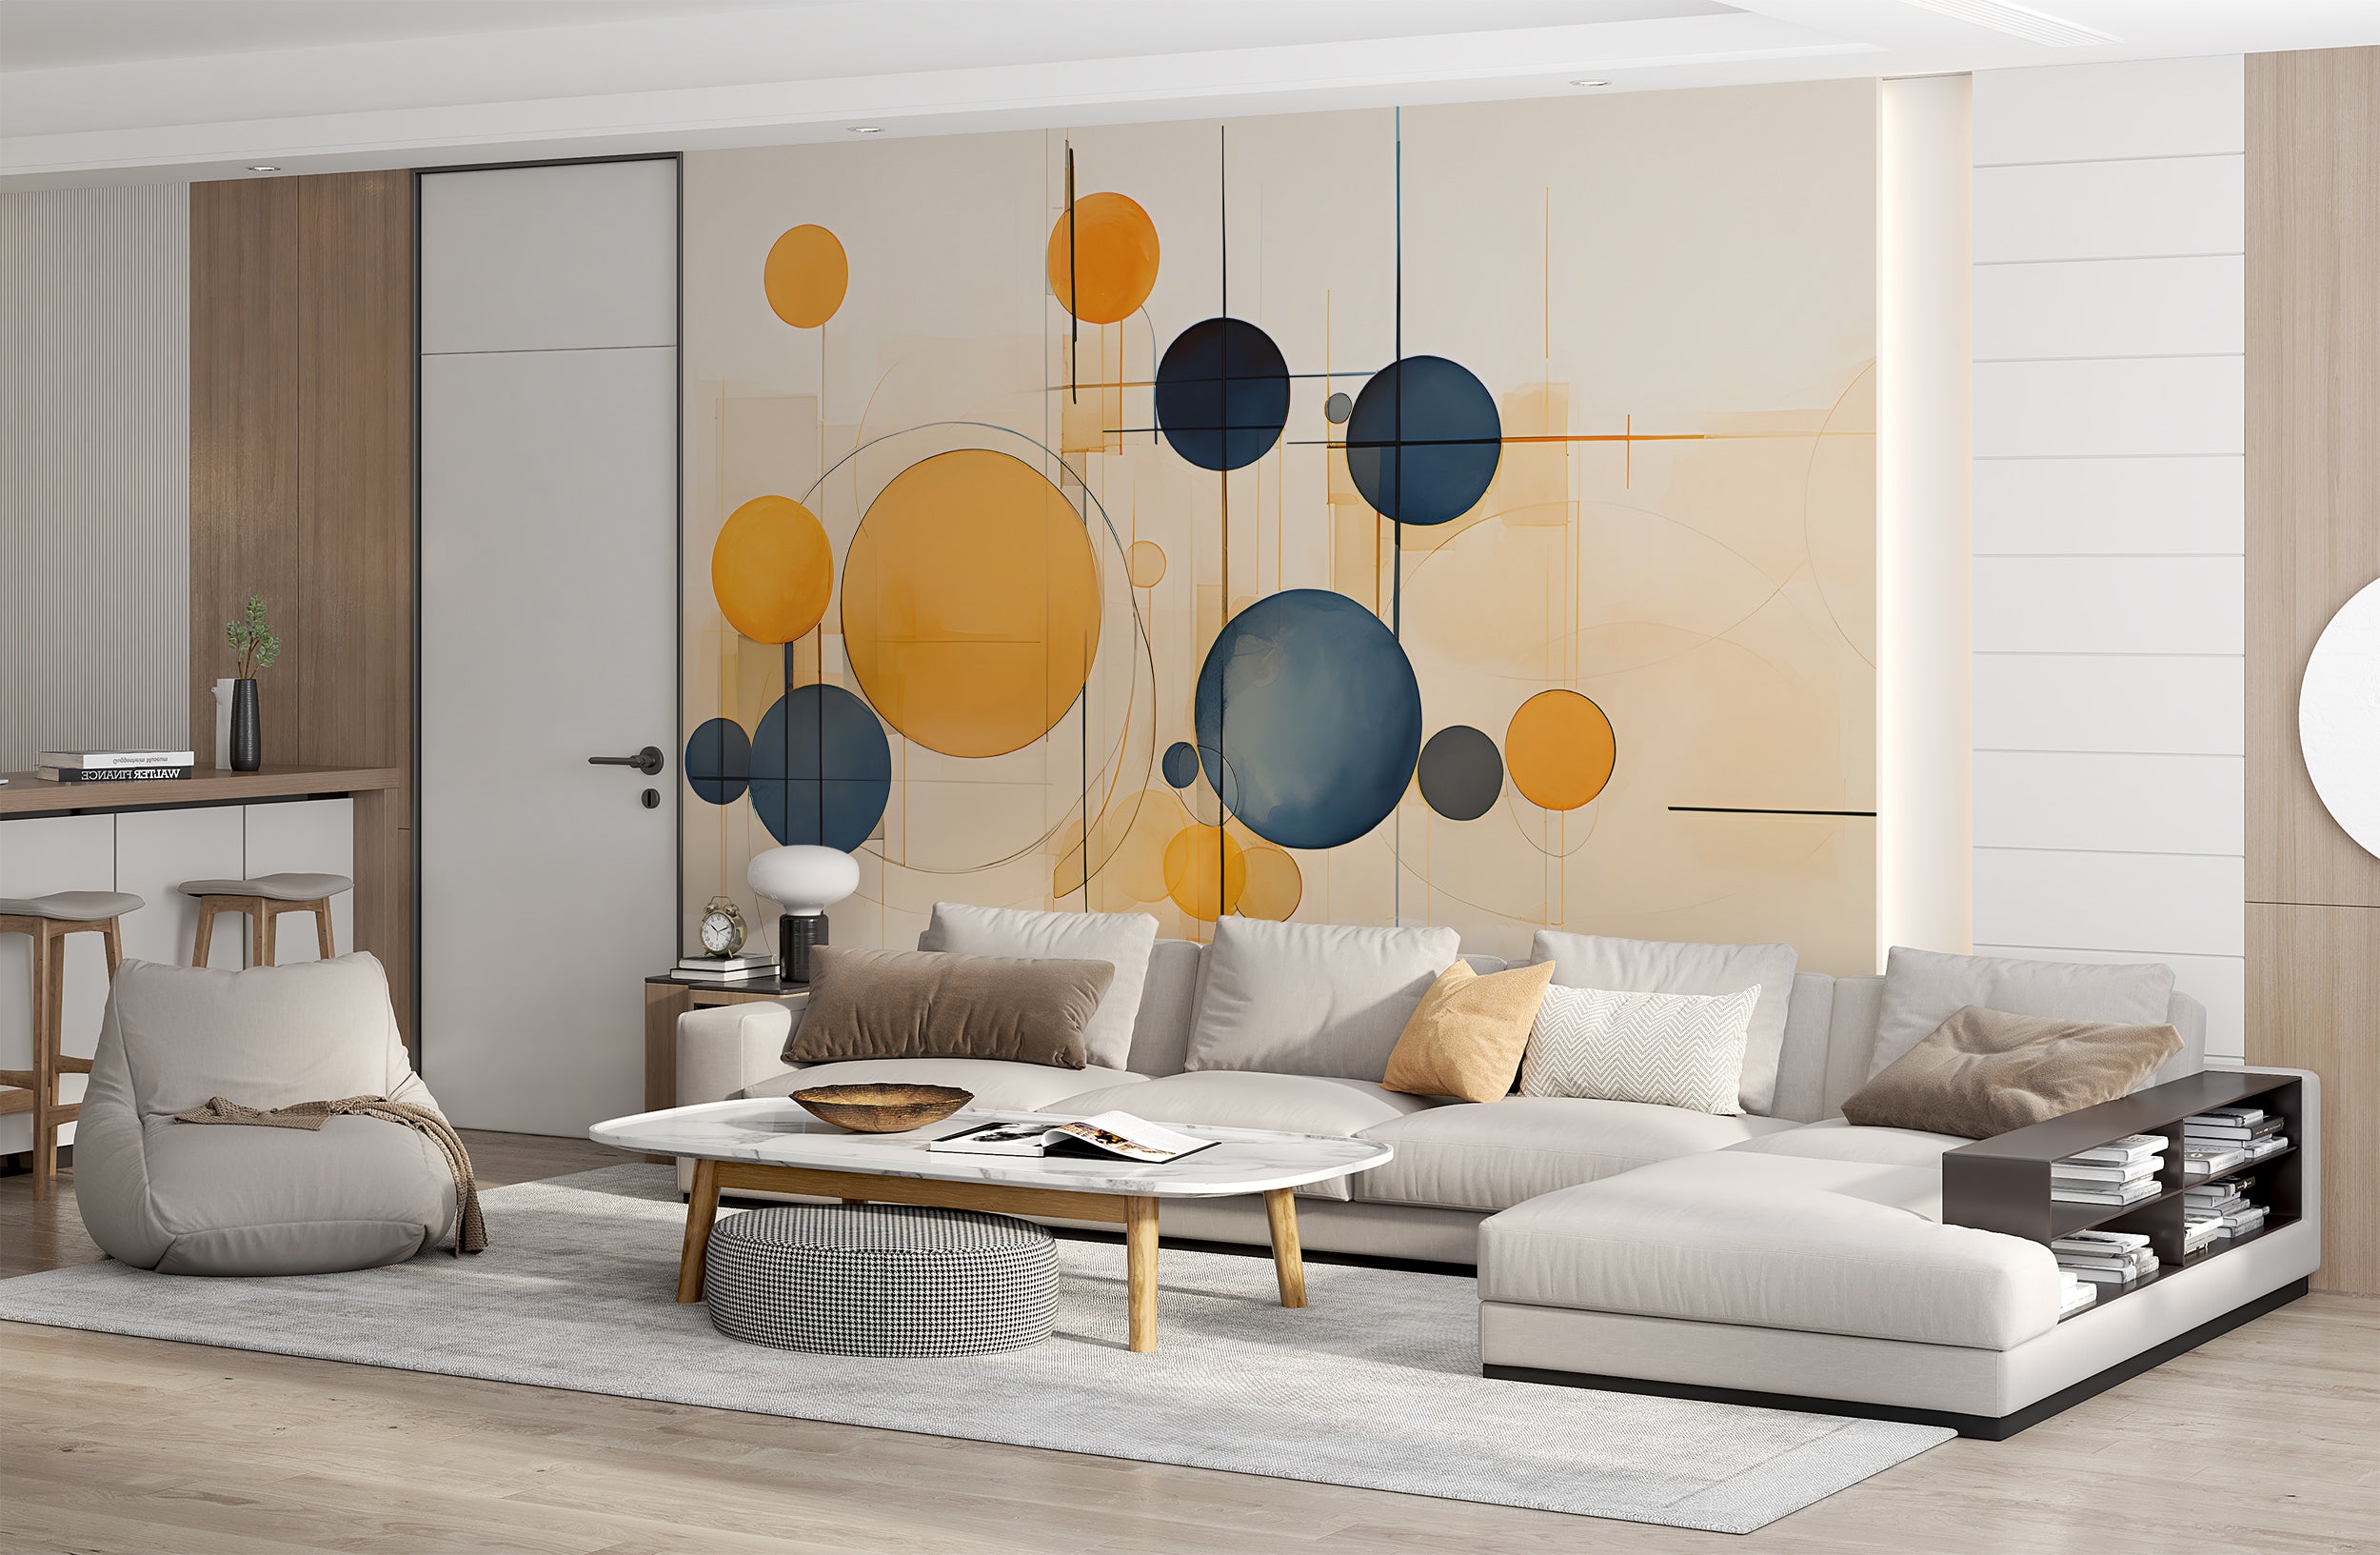 Redefine Your Space with Artistic Wall Patterns